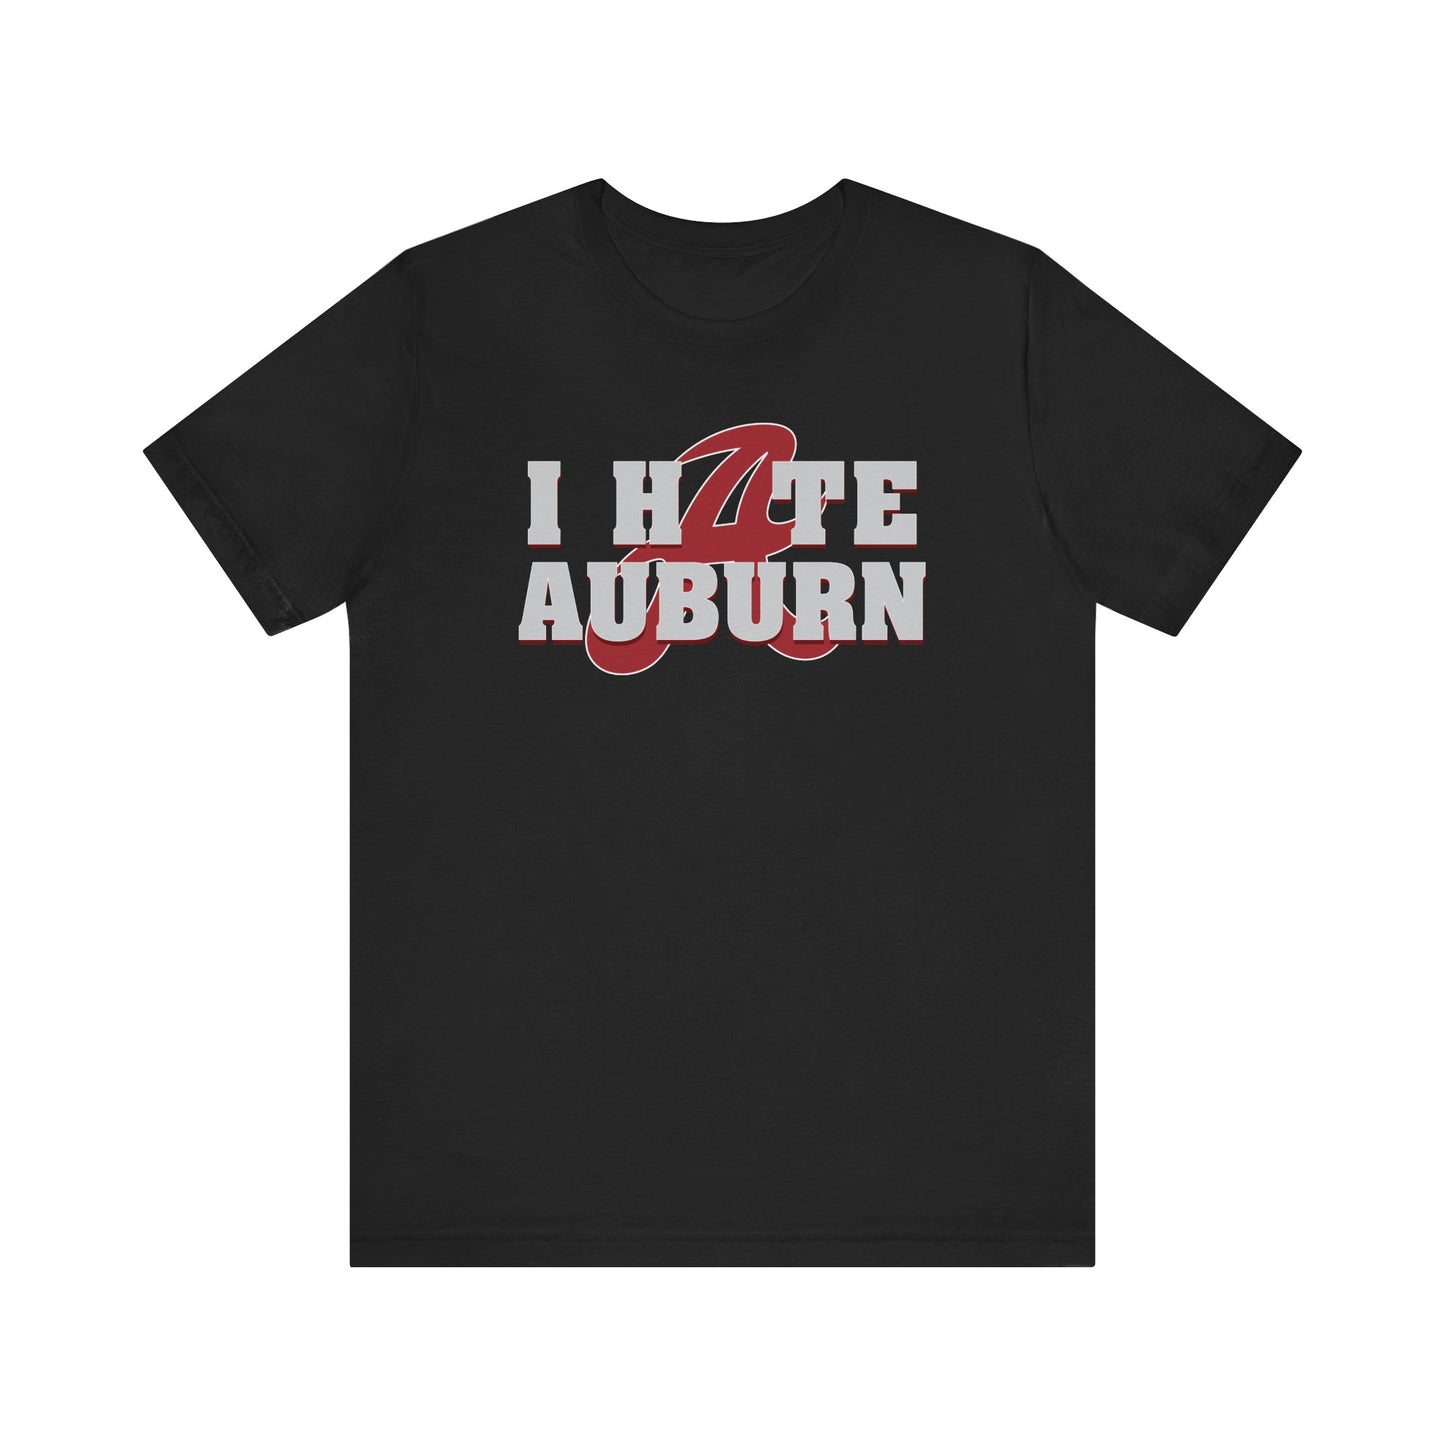 I Hate That Awbern Team (for Alabama fans) - Unisex Jersey Short Sleeve Tee